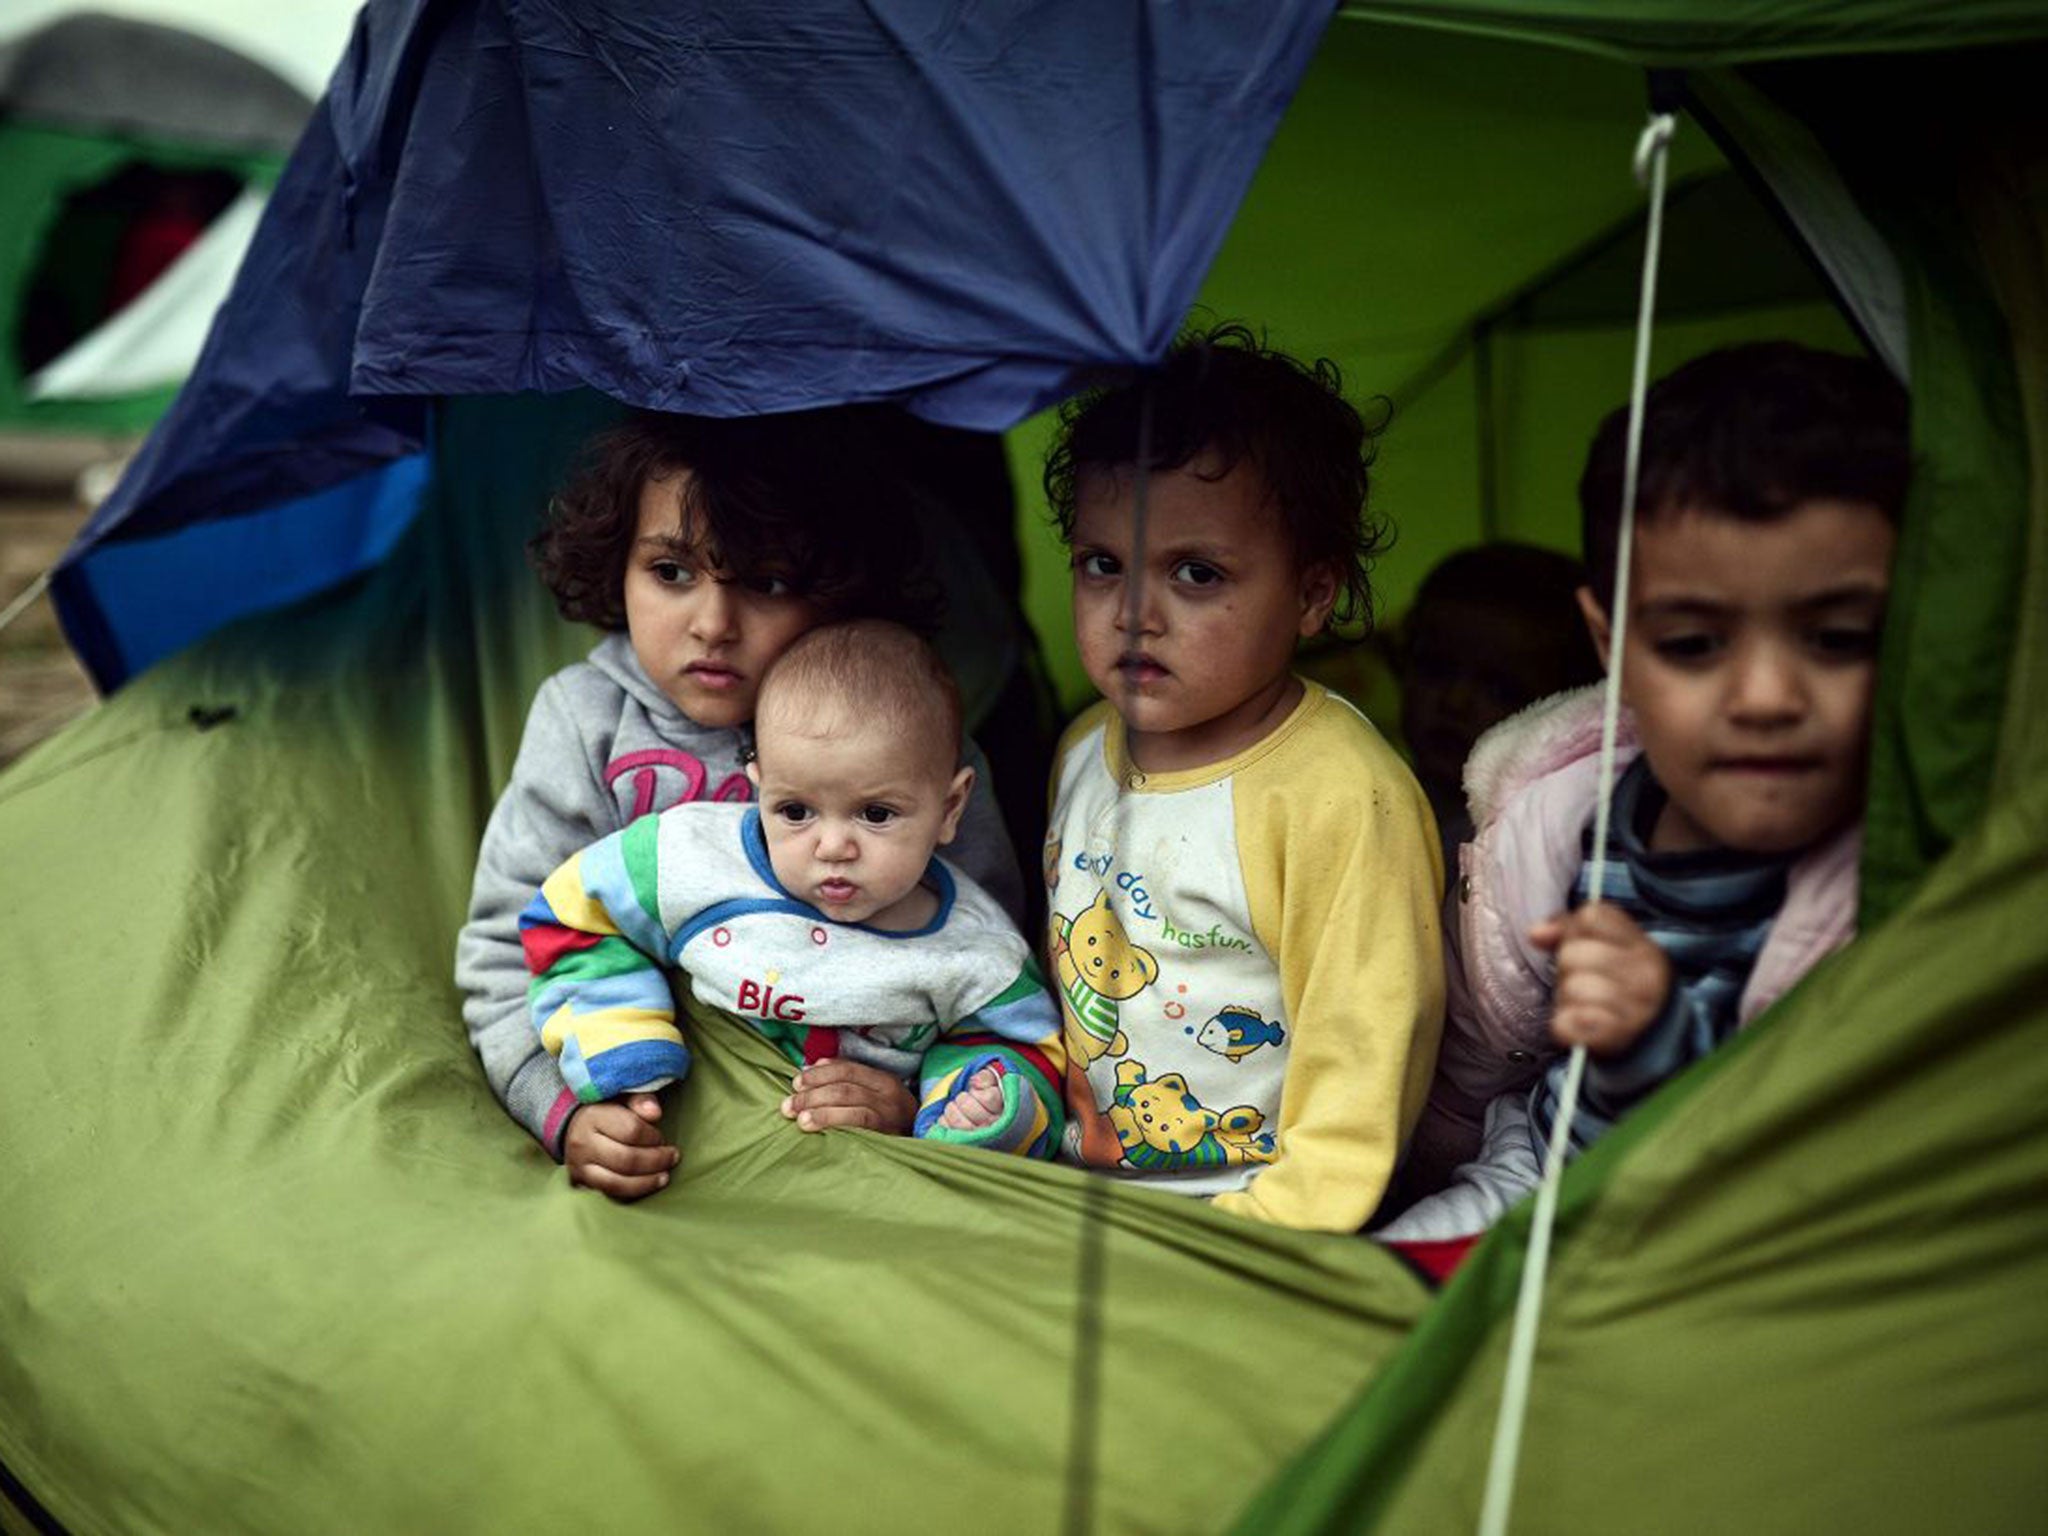 Children in a camp at the Greek-Macedonian border near the village of Idomeni, where thousands of migrants and refugees are stranded